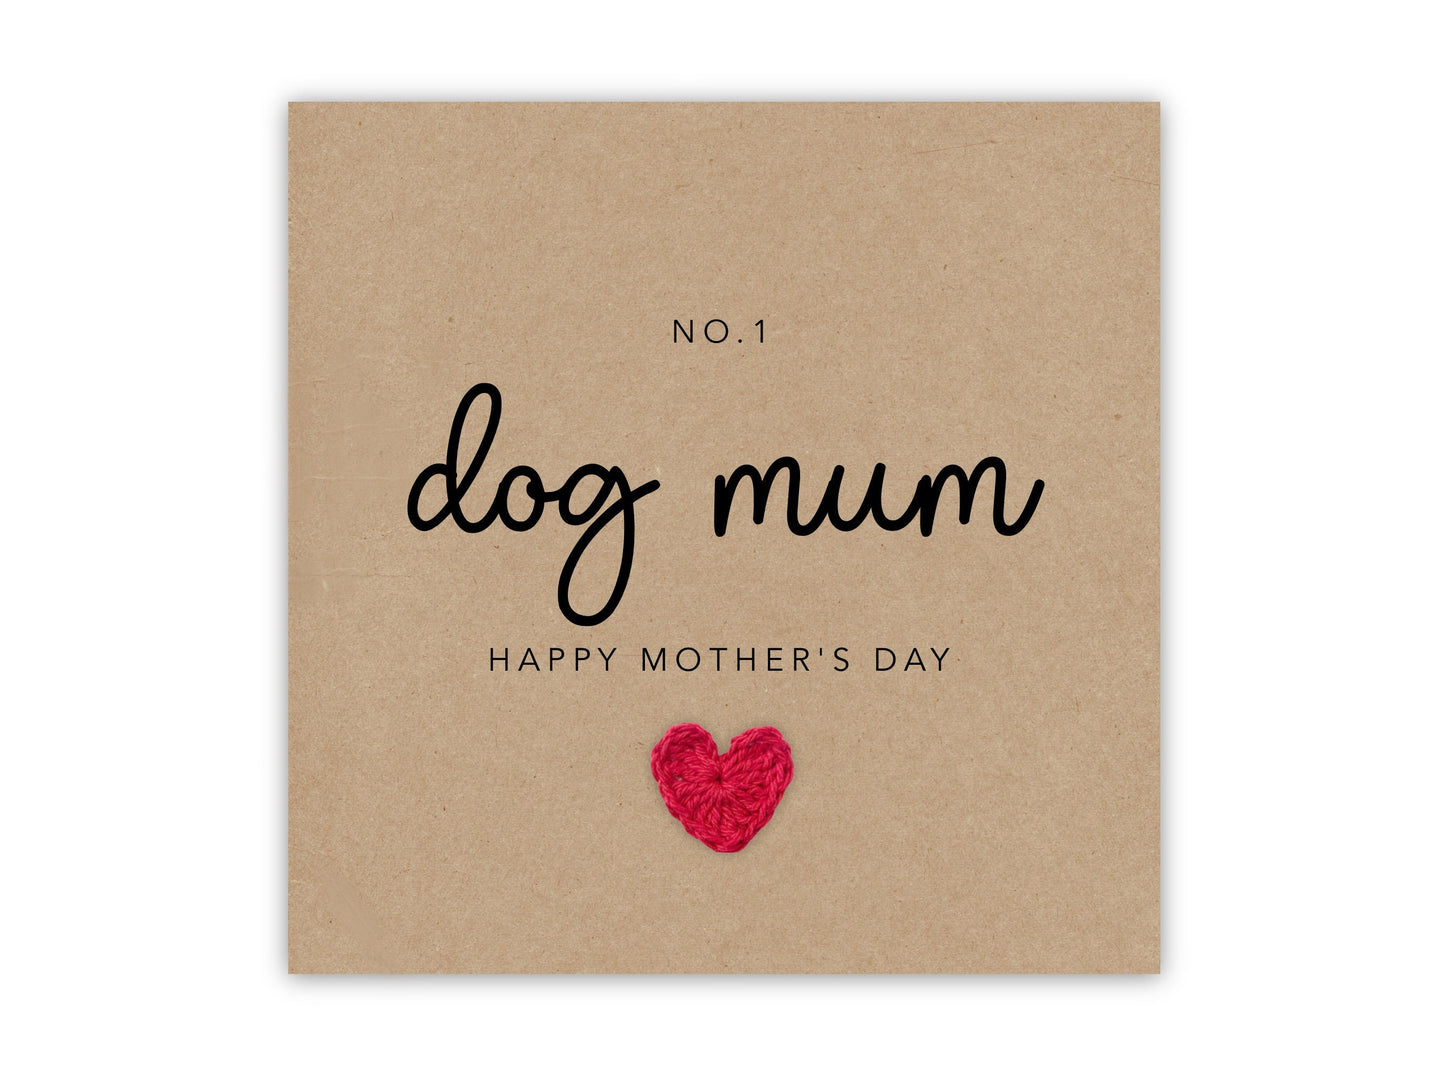 Dog Mum Mothers Day Card, Mothers Day Card For Dog Mum, Dog Parent Mothers Day Card, Happy Mothers Day Card For Dog Mum,  Card from Dog